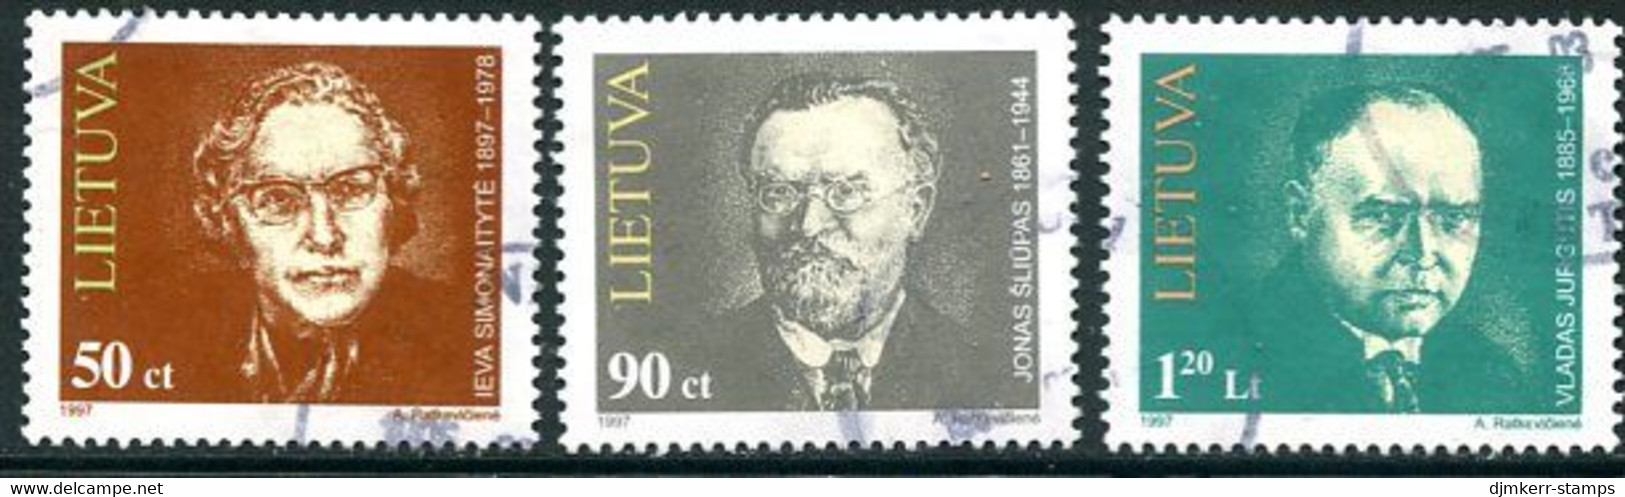 LITHUANIA 1997 Personalities Used.  Michel 627-29 - Lithuania